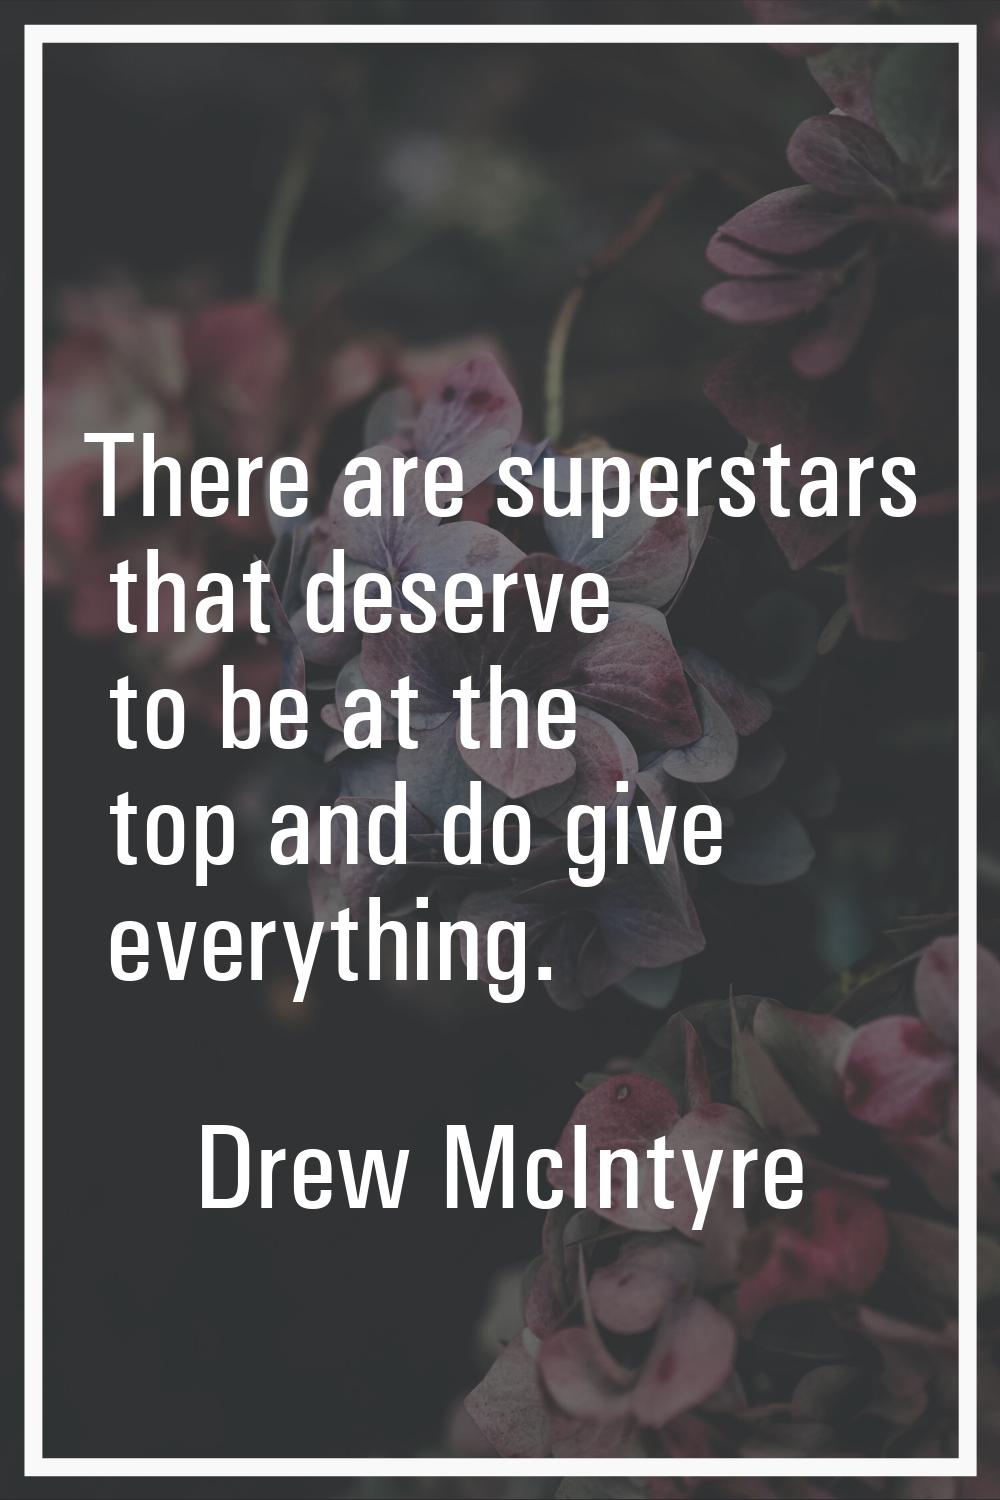 There are superstars that deserve to be at the top and do give everything.